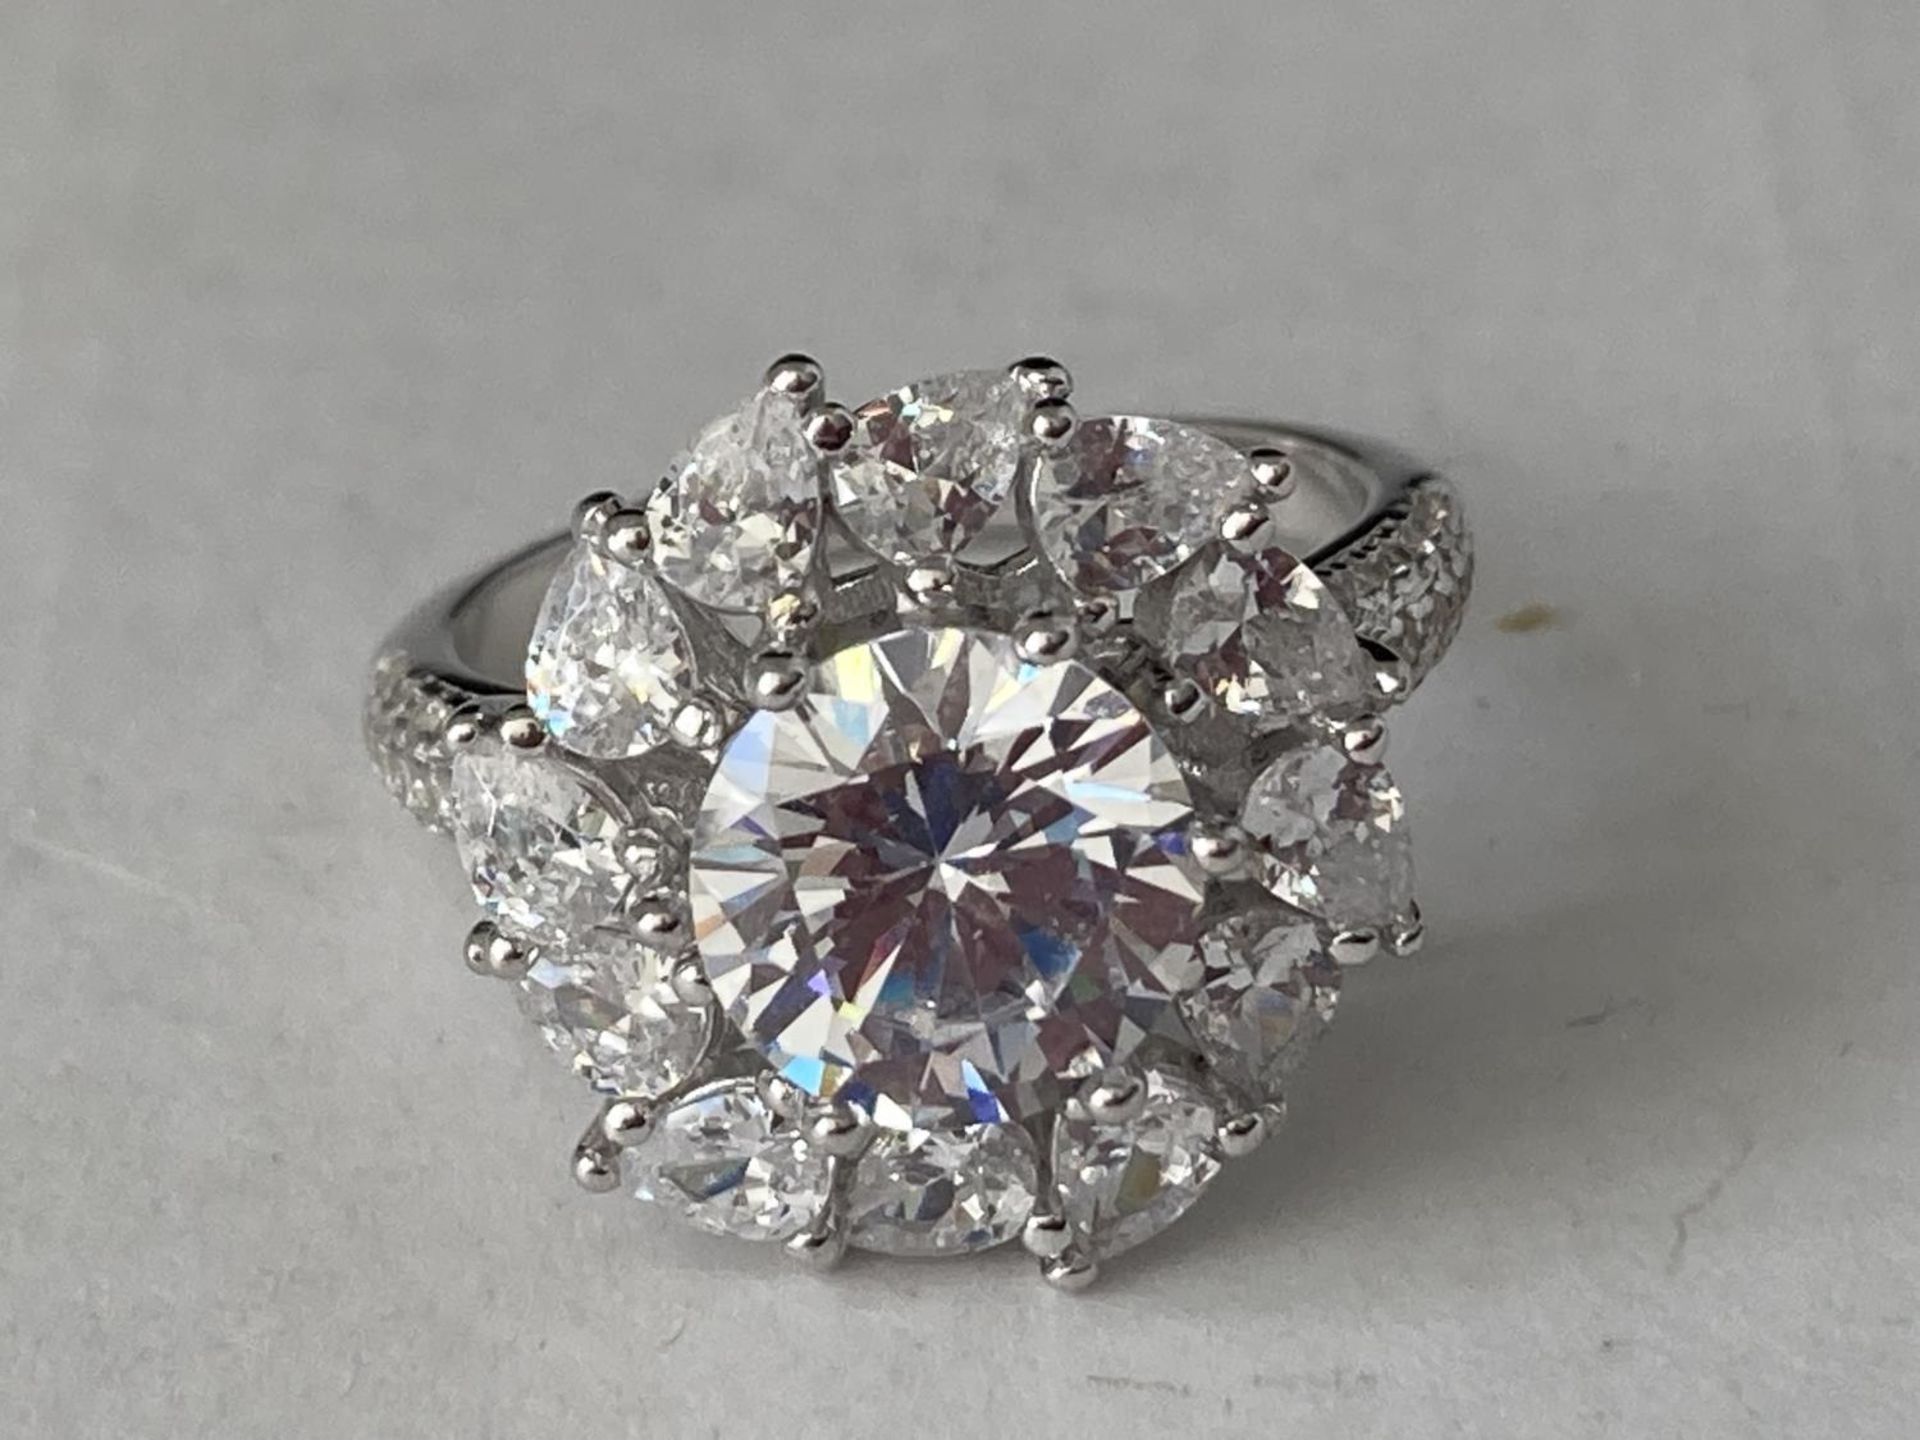 A WHITE METAL RING WITH 3 CARATS OF MOISSANITE IN A FLOWER DESIGN AND ON THE SHOULDERS SIZE P/Q